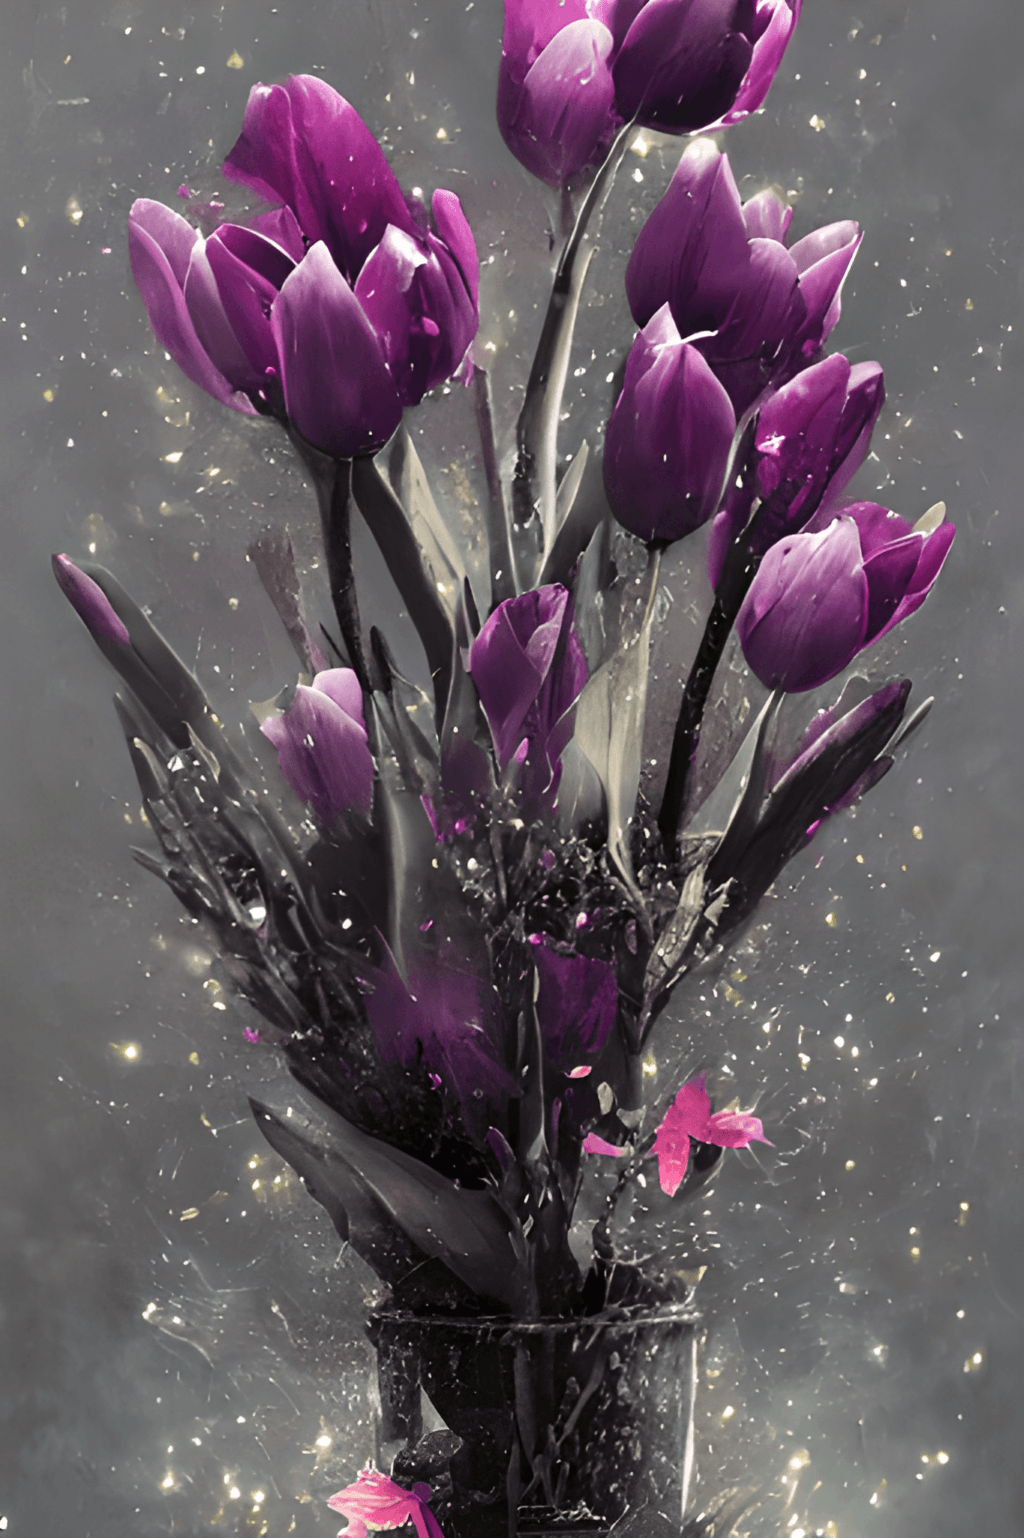 A vase of purple tulips on a table, with some petals scattered around. - Tulip